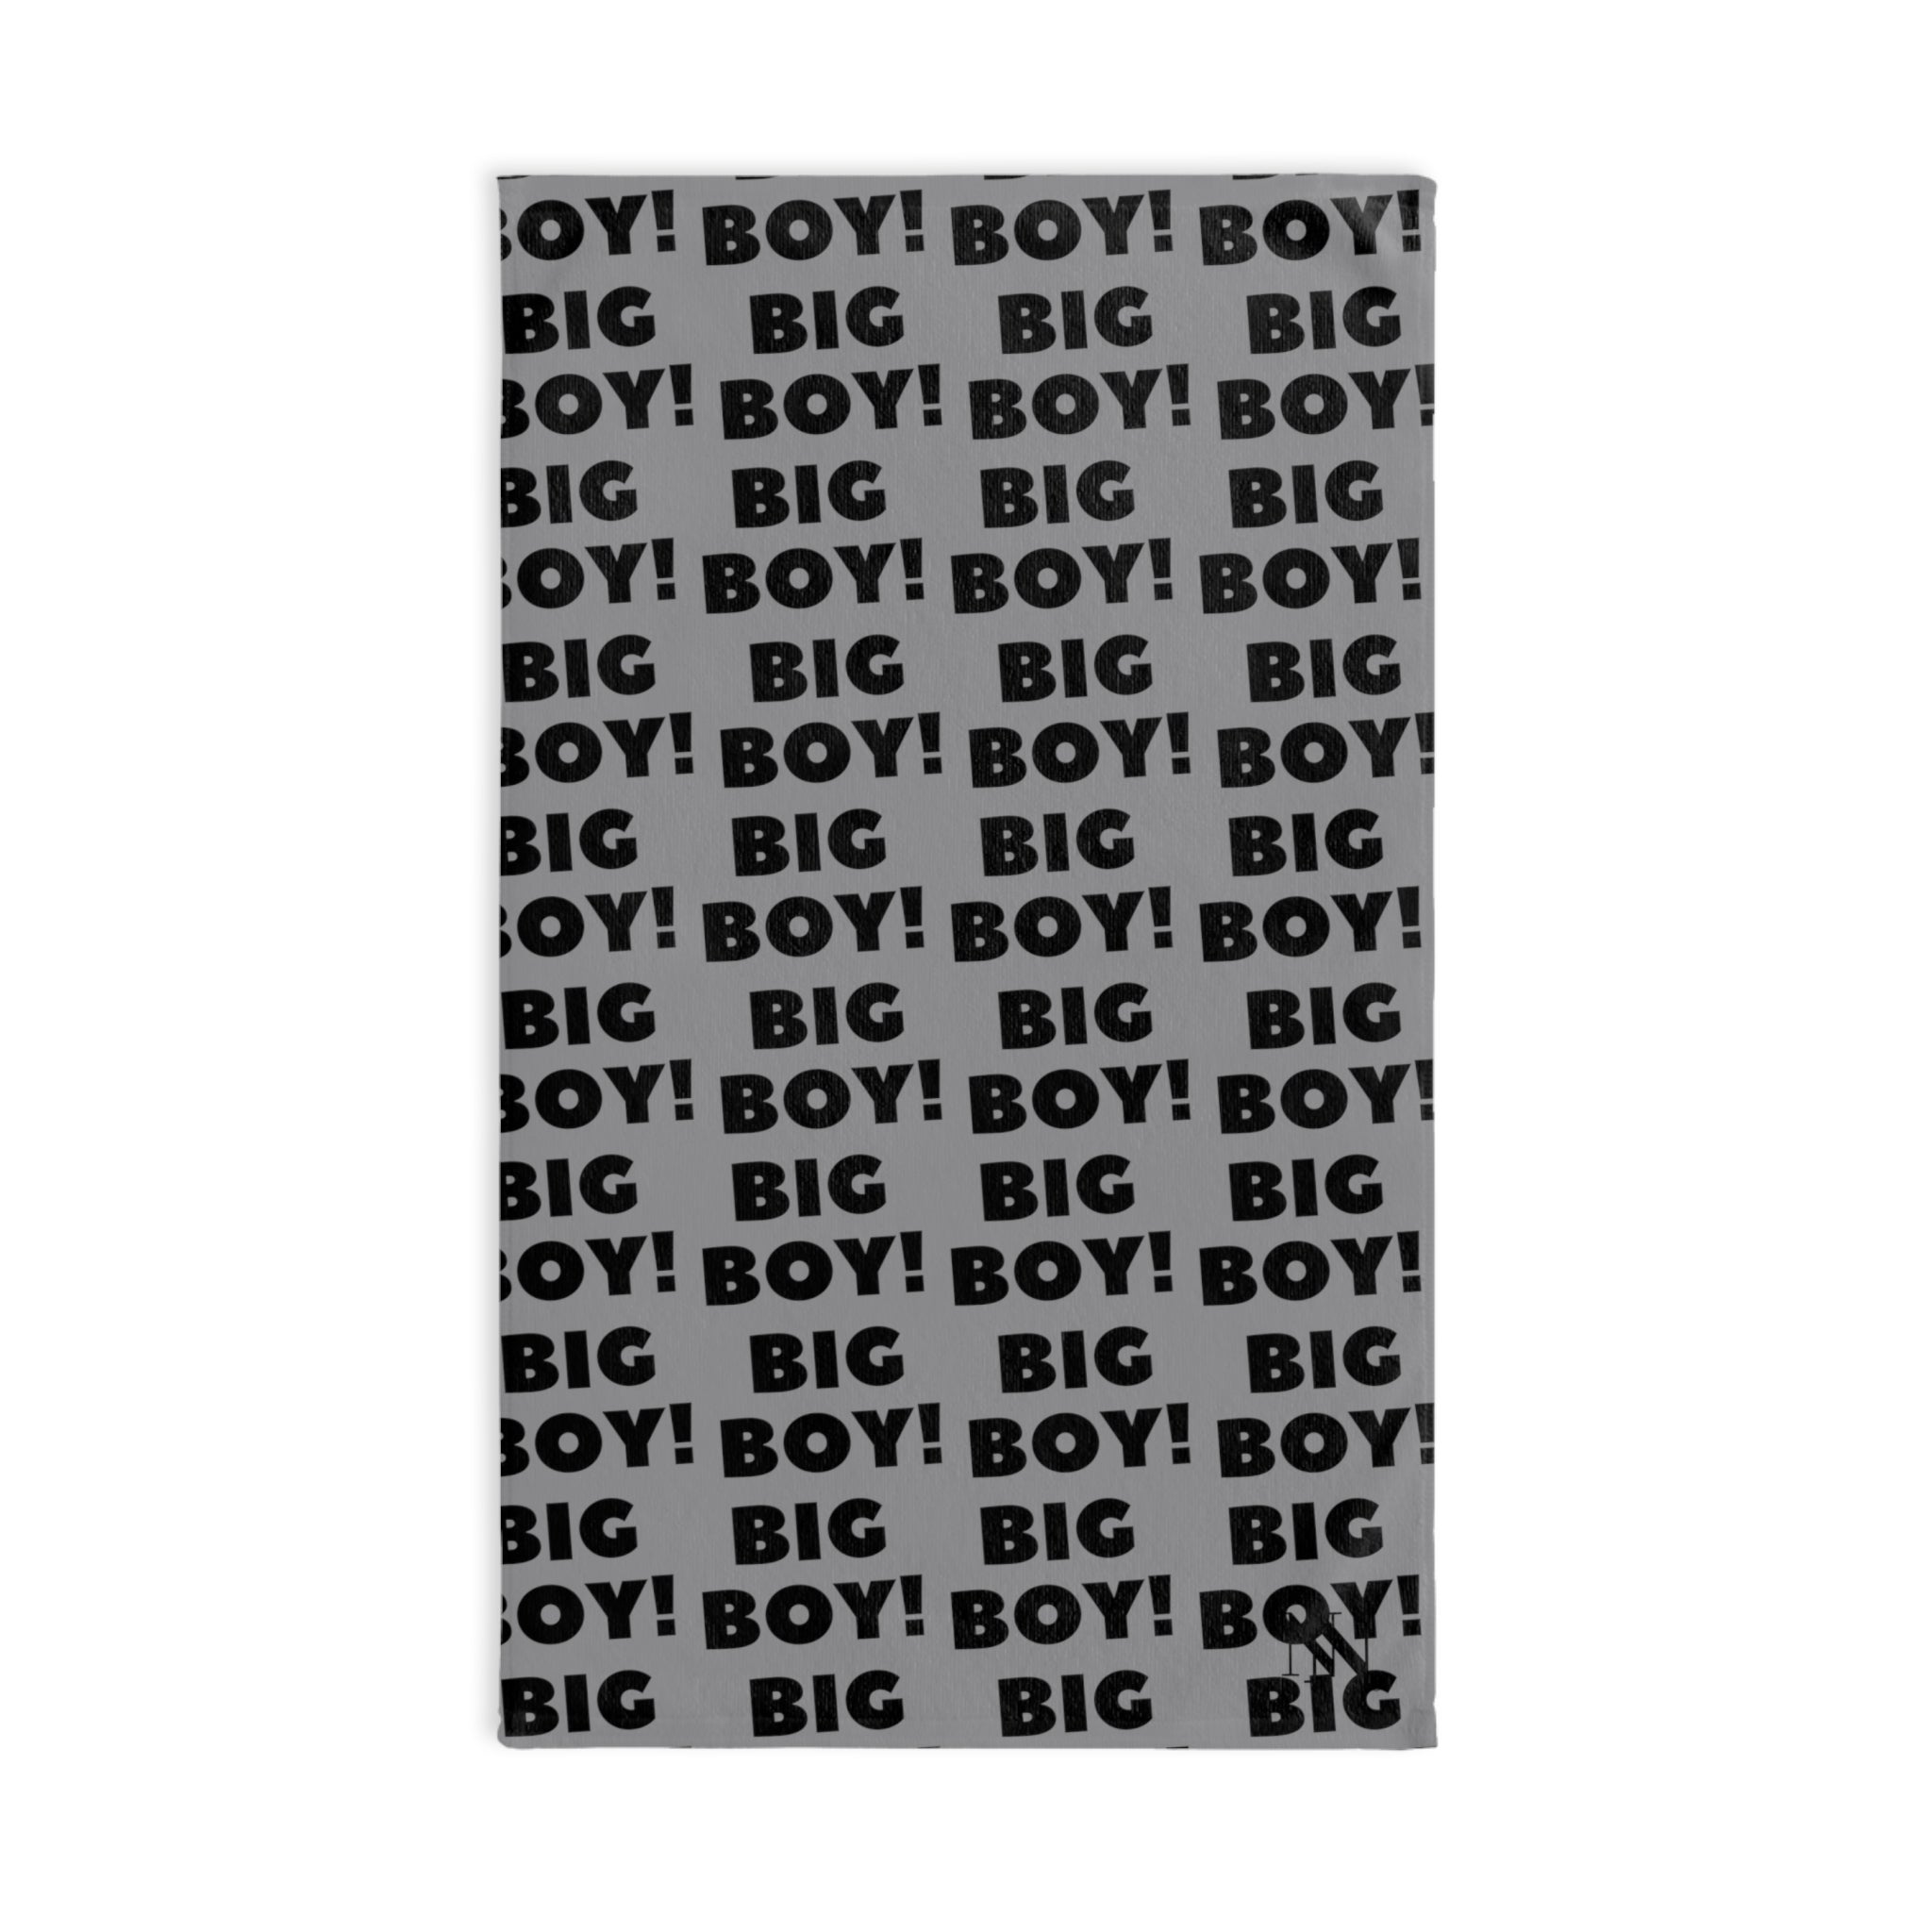 Big Boy Pattern Grey | Anniversary Wedding, Christmas, Valentines Day, Birthday Gifts for Him, Her, Romantic Gifts for Wife, Girlfriend, Couples Gifts for Boyfriend, Husband NECTAR NAPKINS